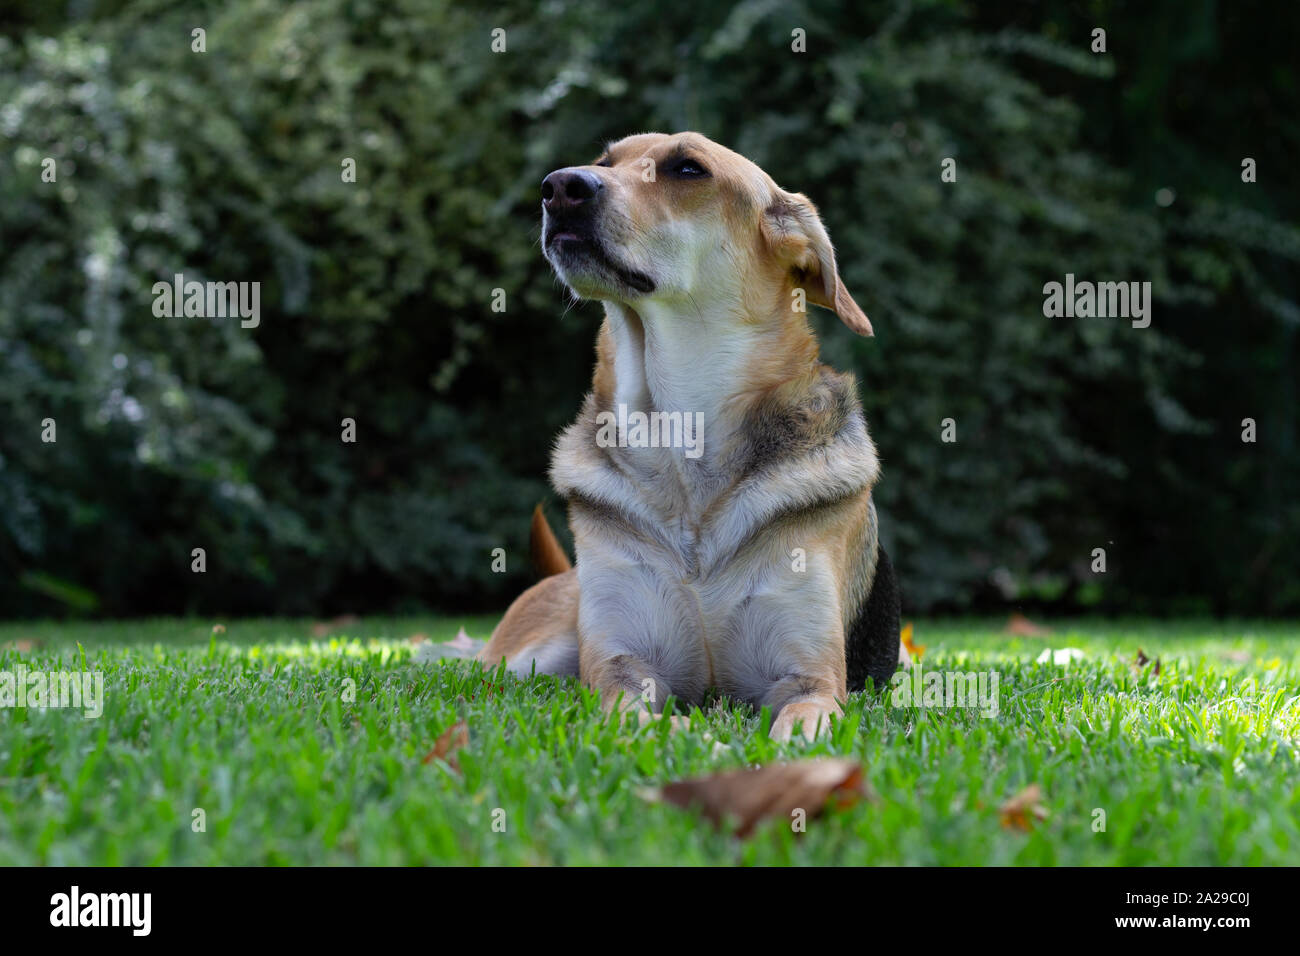 Multicolored dog lying 8n the grass looking to the side with a large shrub in the background Stock Photo